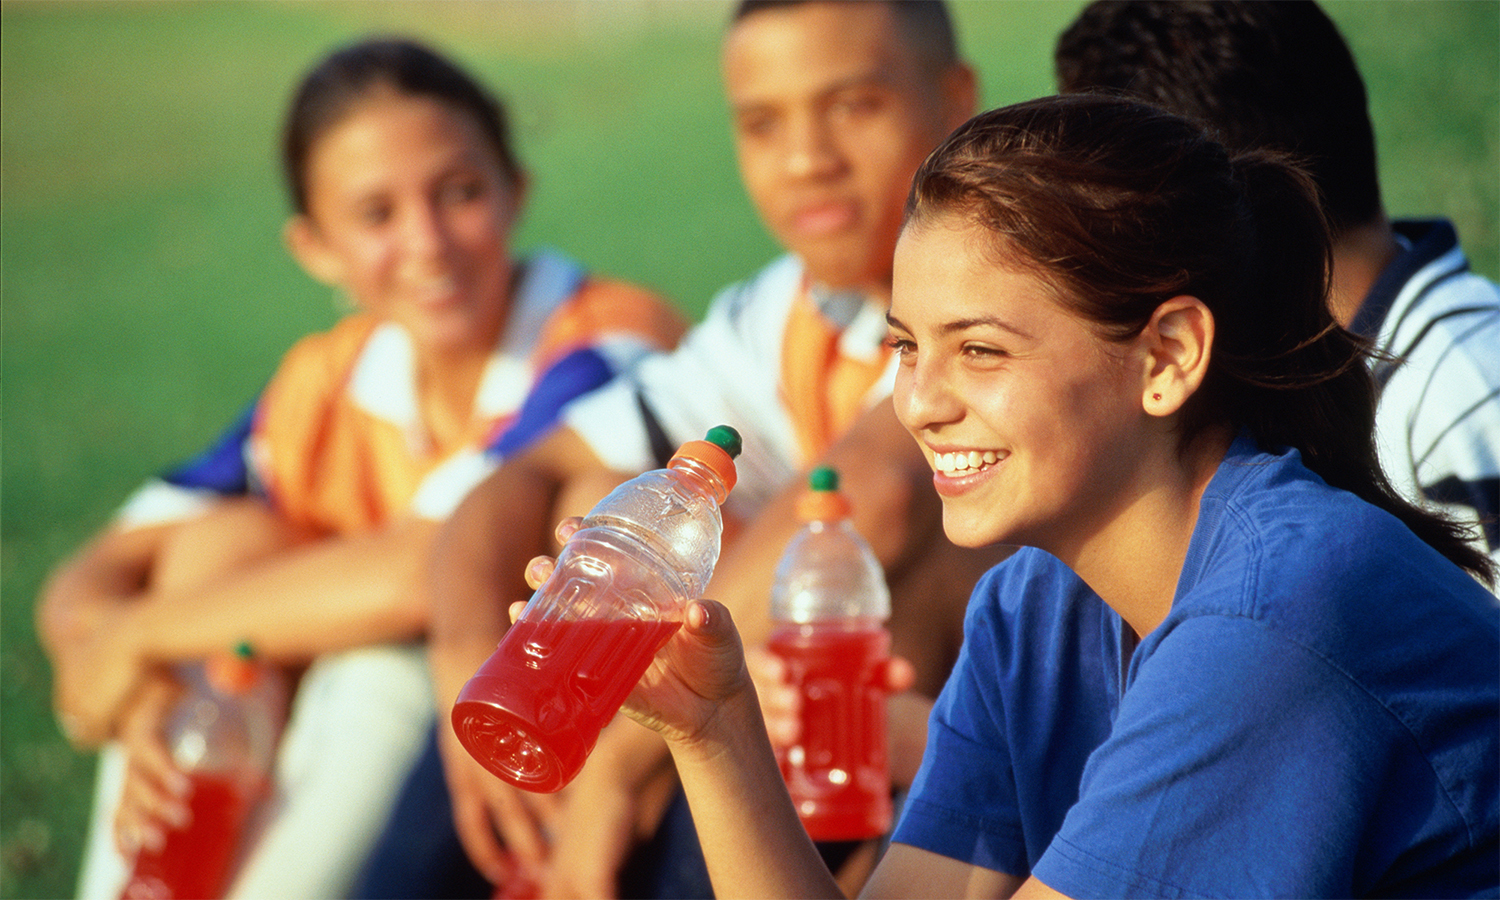 You are currently viewing Energy and Sports Drinks Damage Teeth